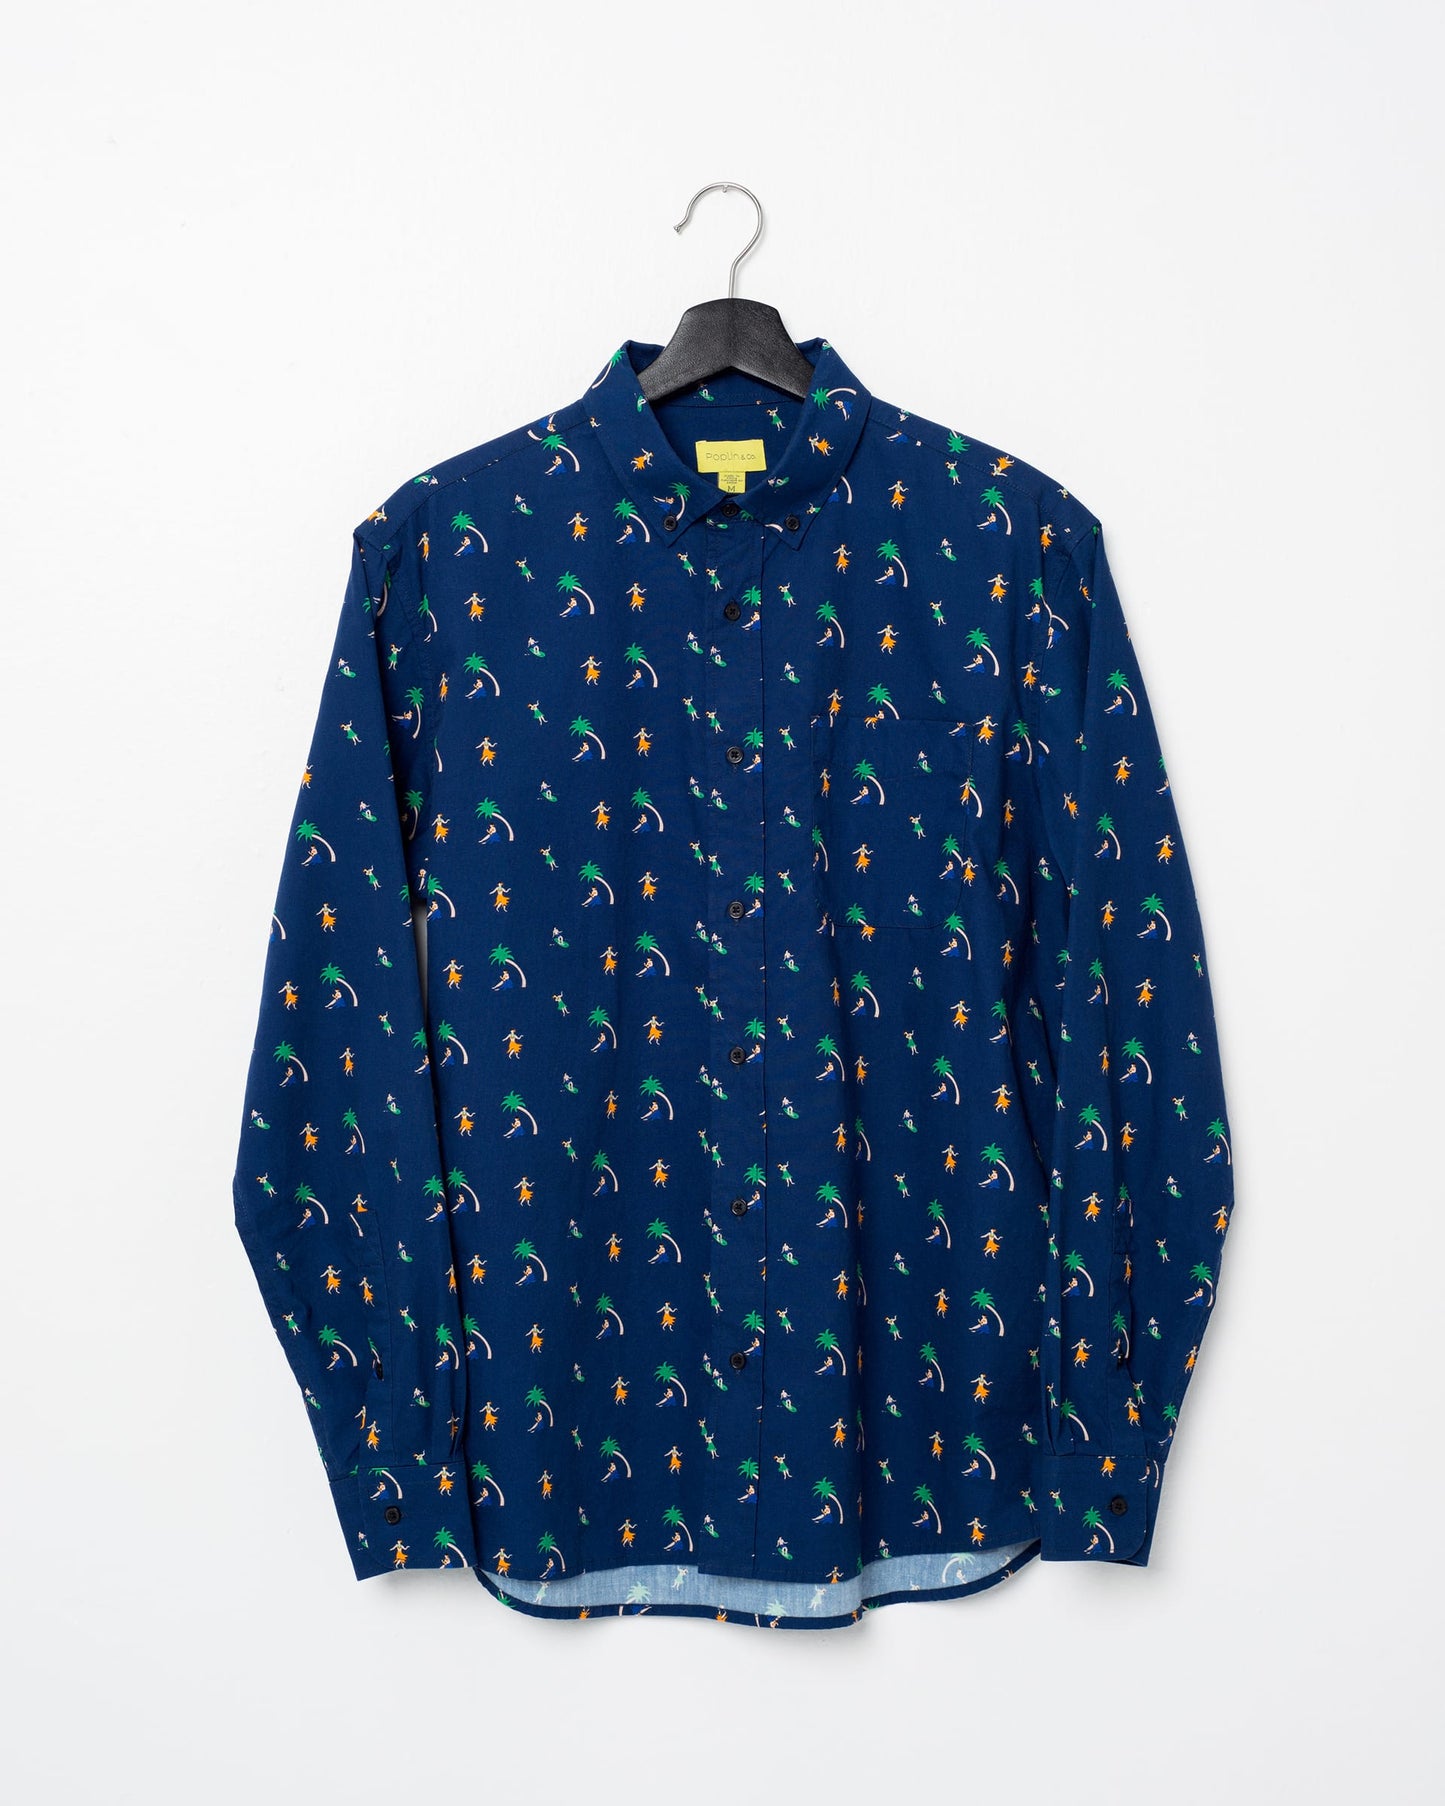 Aloha Printed Casual Button-Down Long Sleeve Shirt (Sizes: S - XL) (Sale Price: $107.09 CAD))